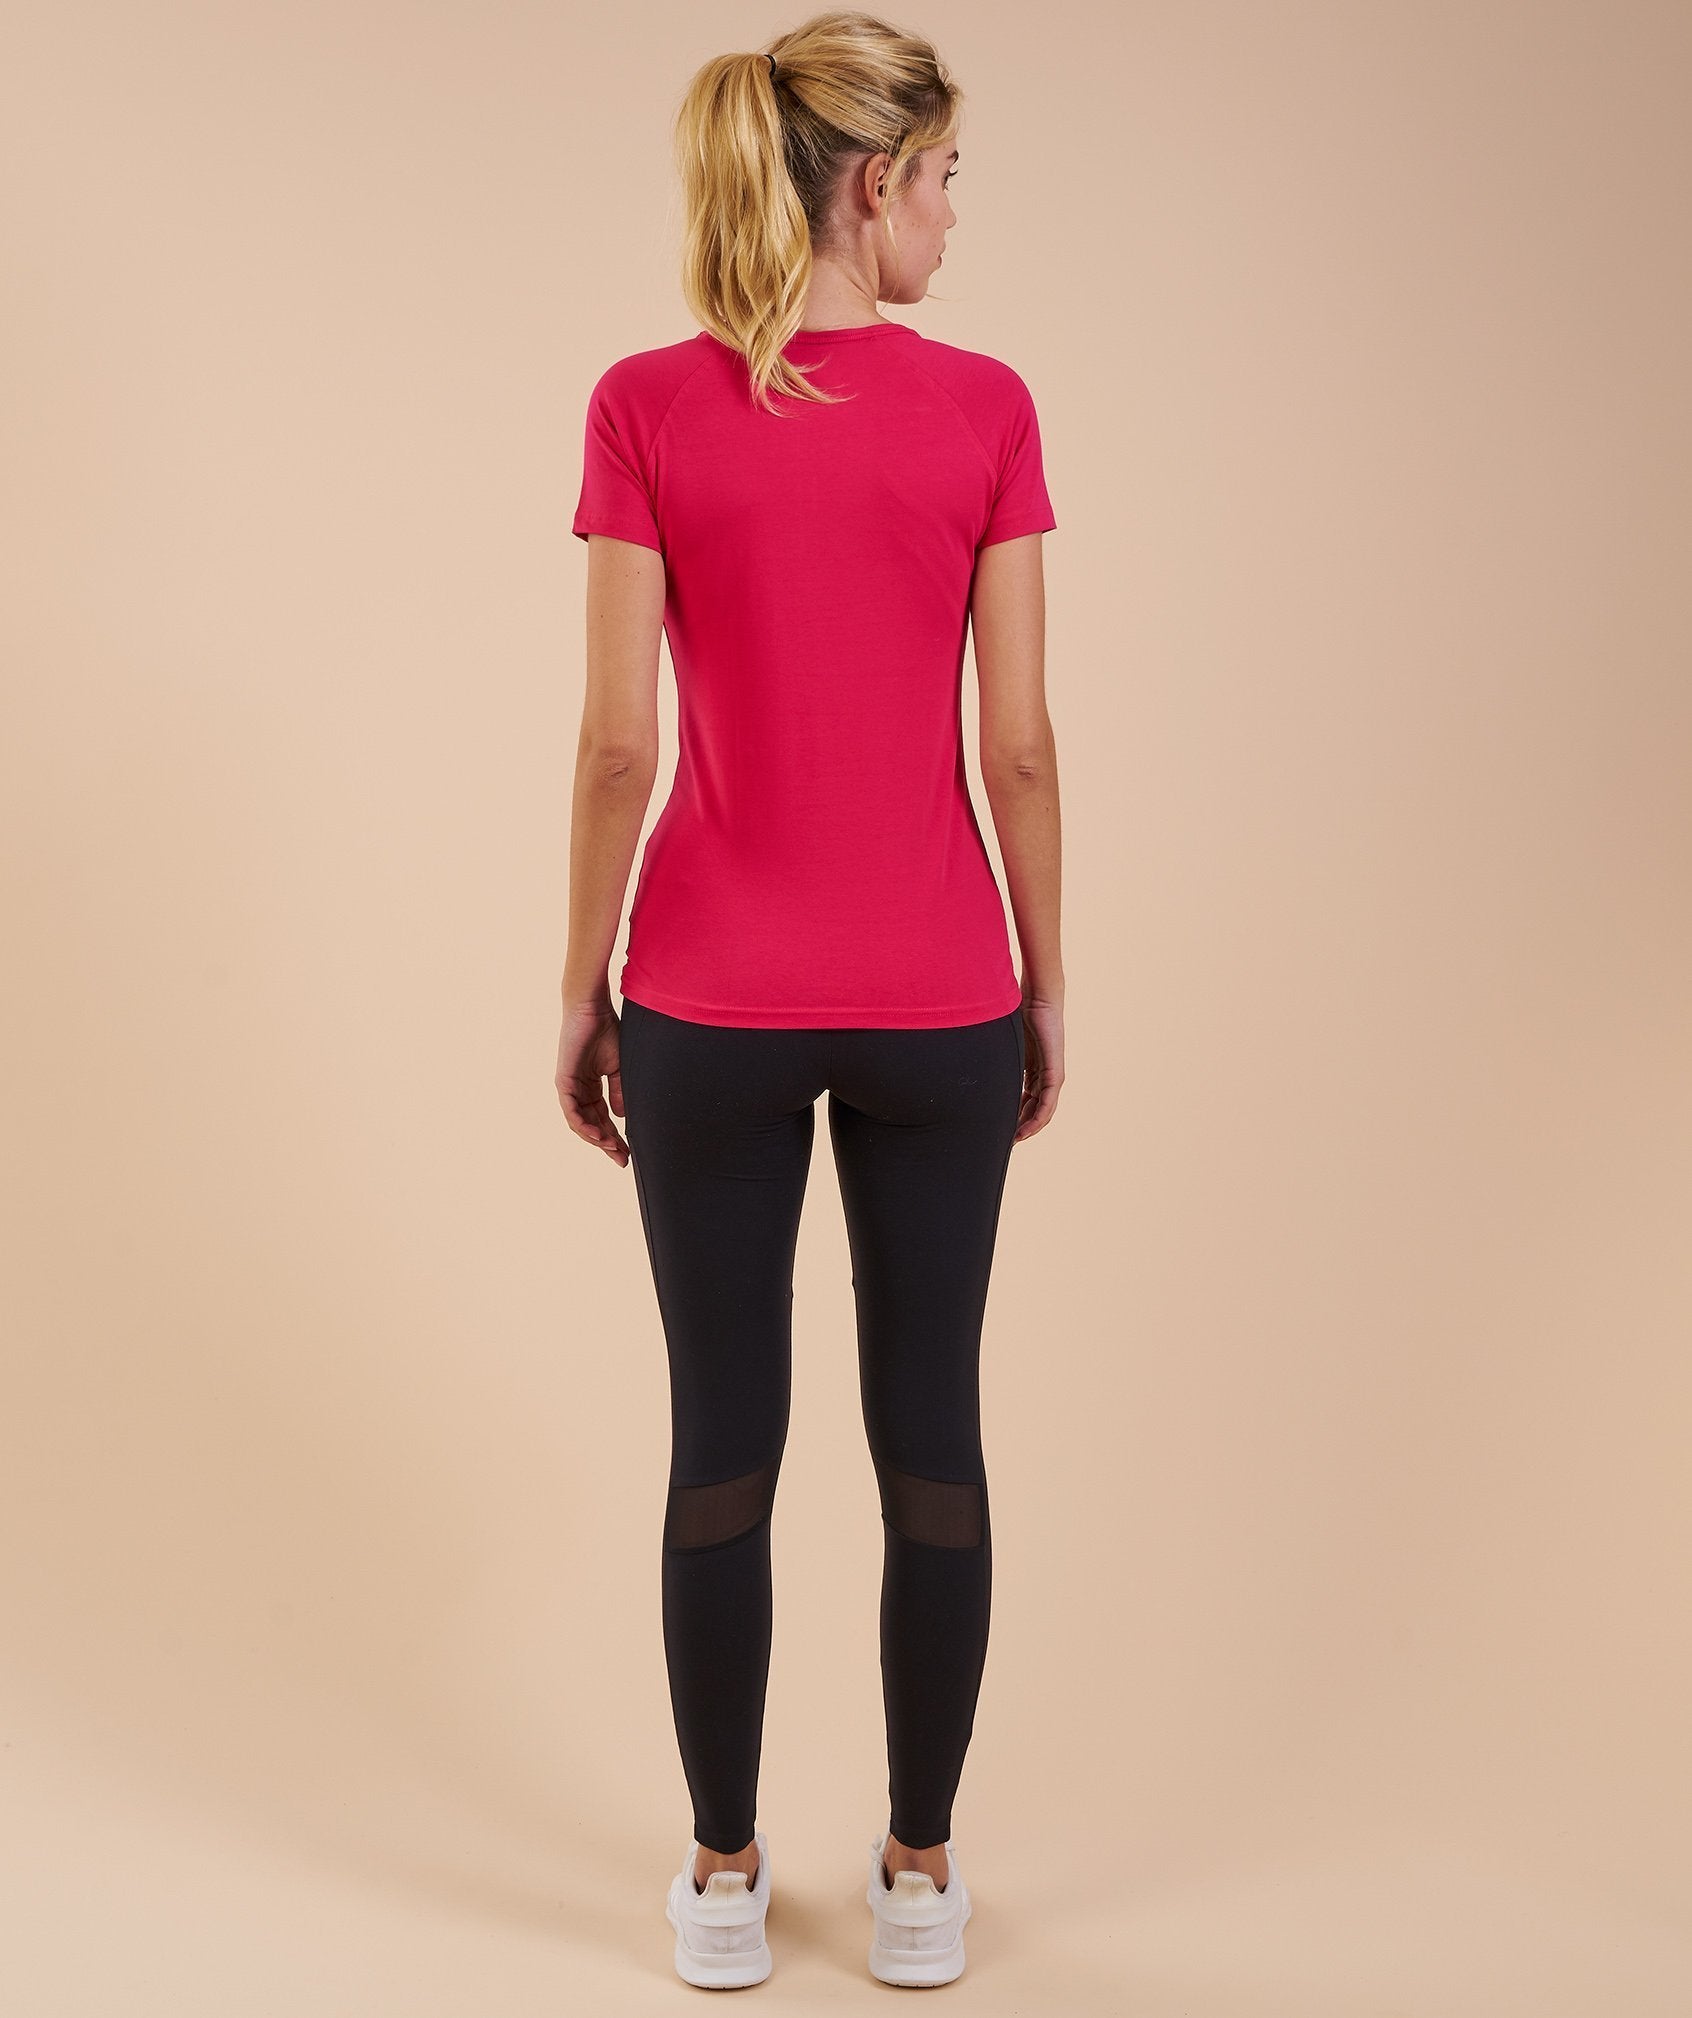 Women's Apollo T-Shirt in Cranberry - view 2